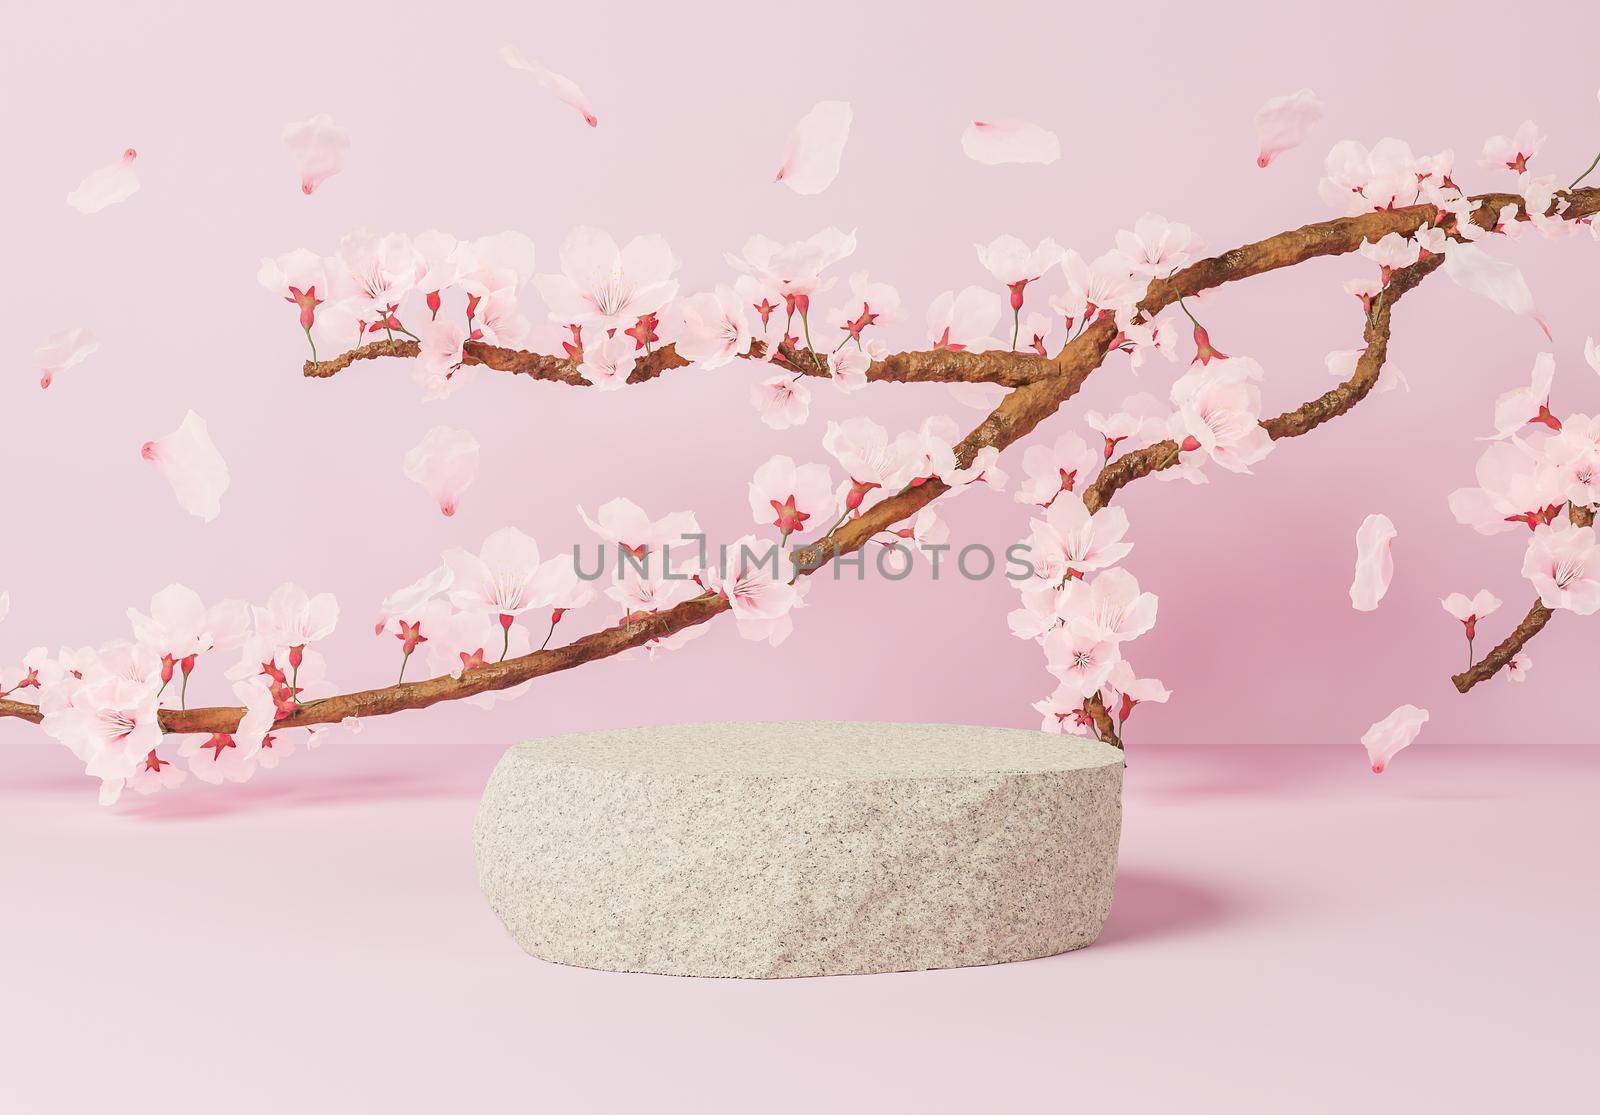 rock for product presentation with branch full of cherry blossoms by asolano